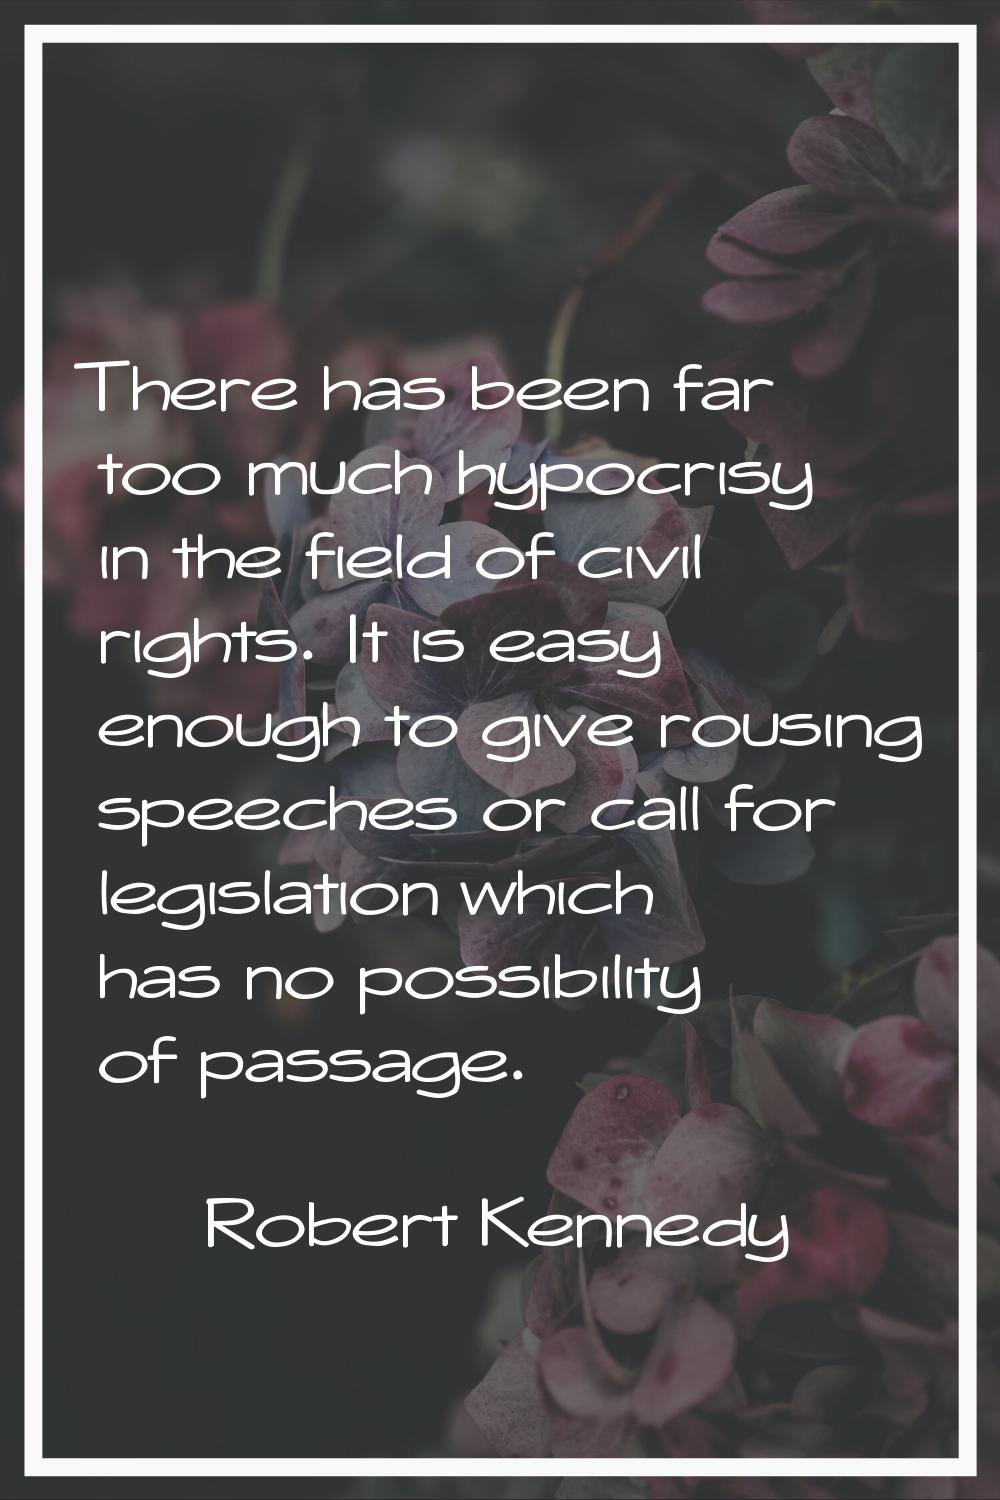 There has been far too much hypocrisy in the field of civil rights. It is easy enough to give rousi